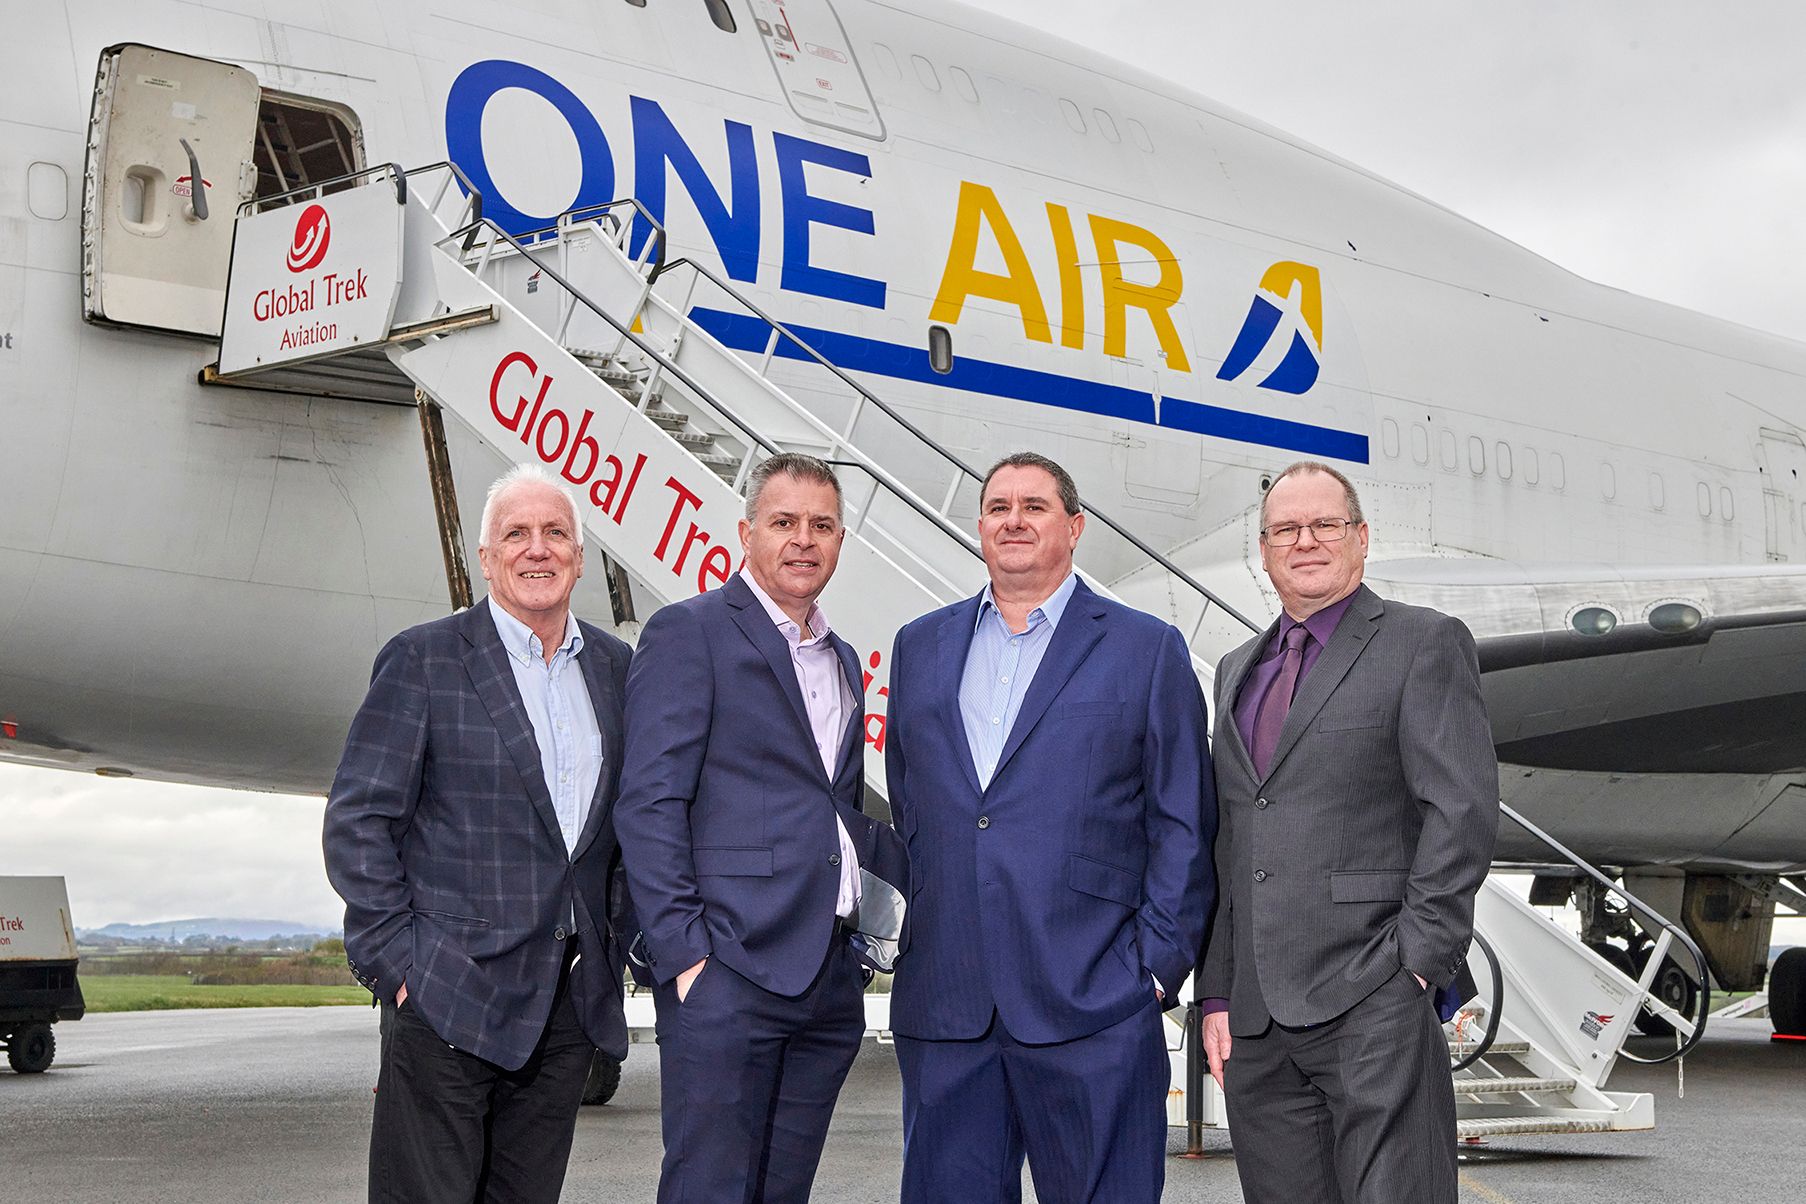 David Tattersall, Chief Technical Officer, Chris Hope, Chief Operating Officer, Paul Bennett, CEO, and Jon Hartley, Chief Financial Officer, of One Air 